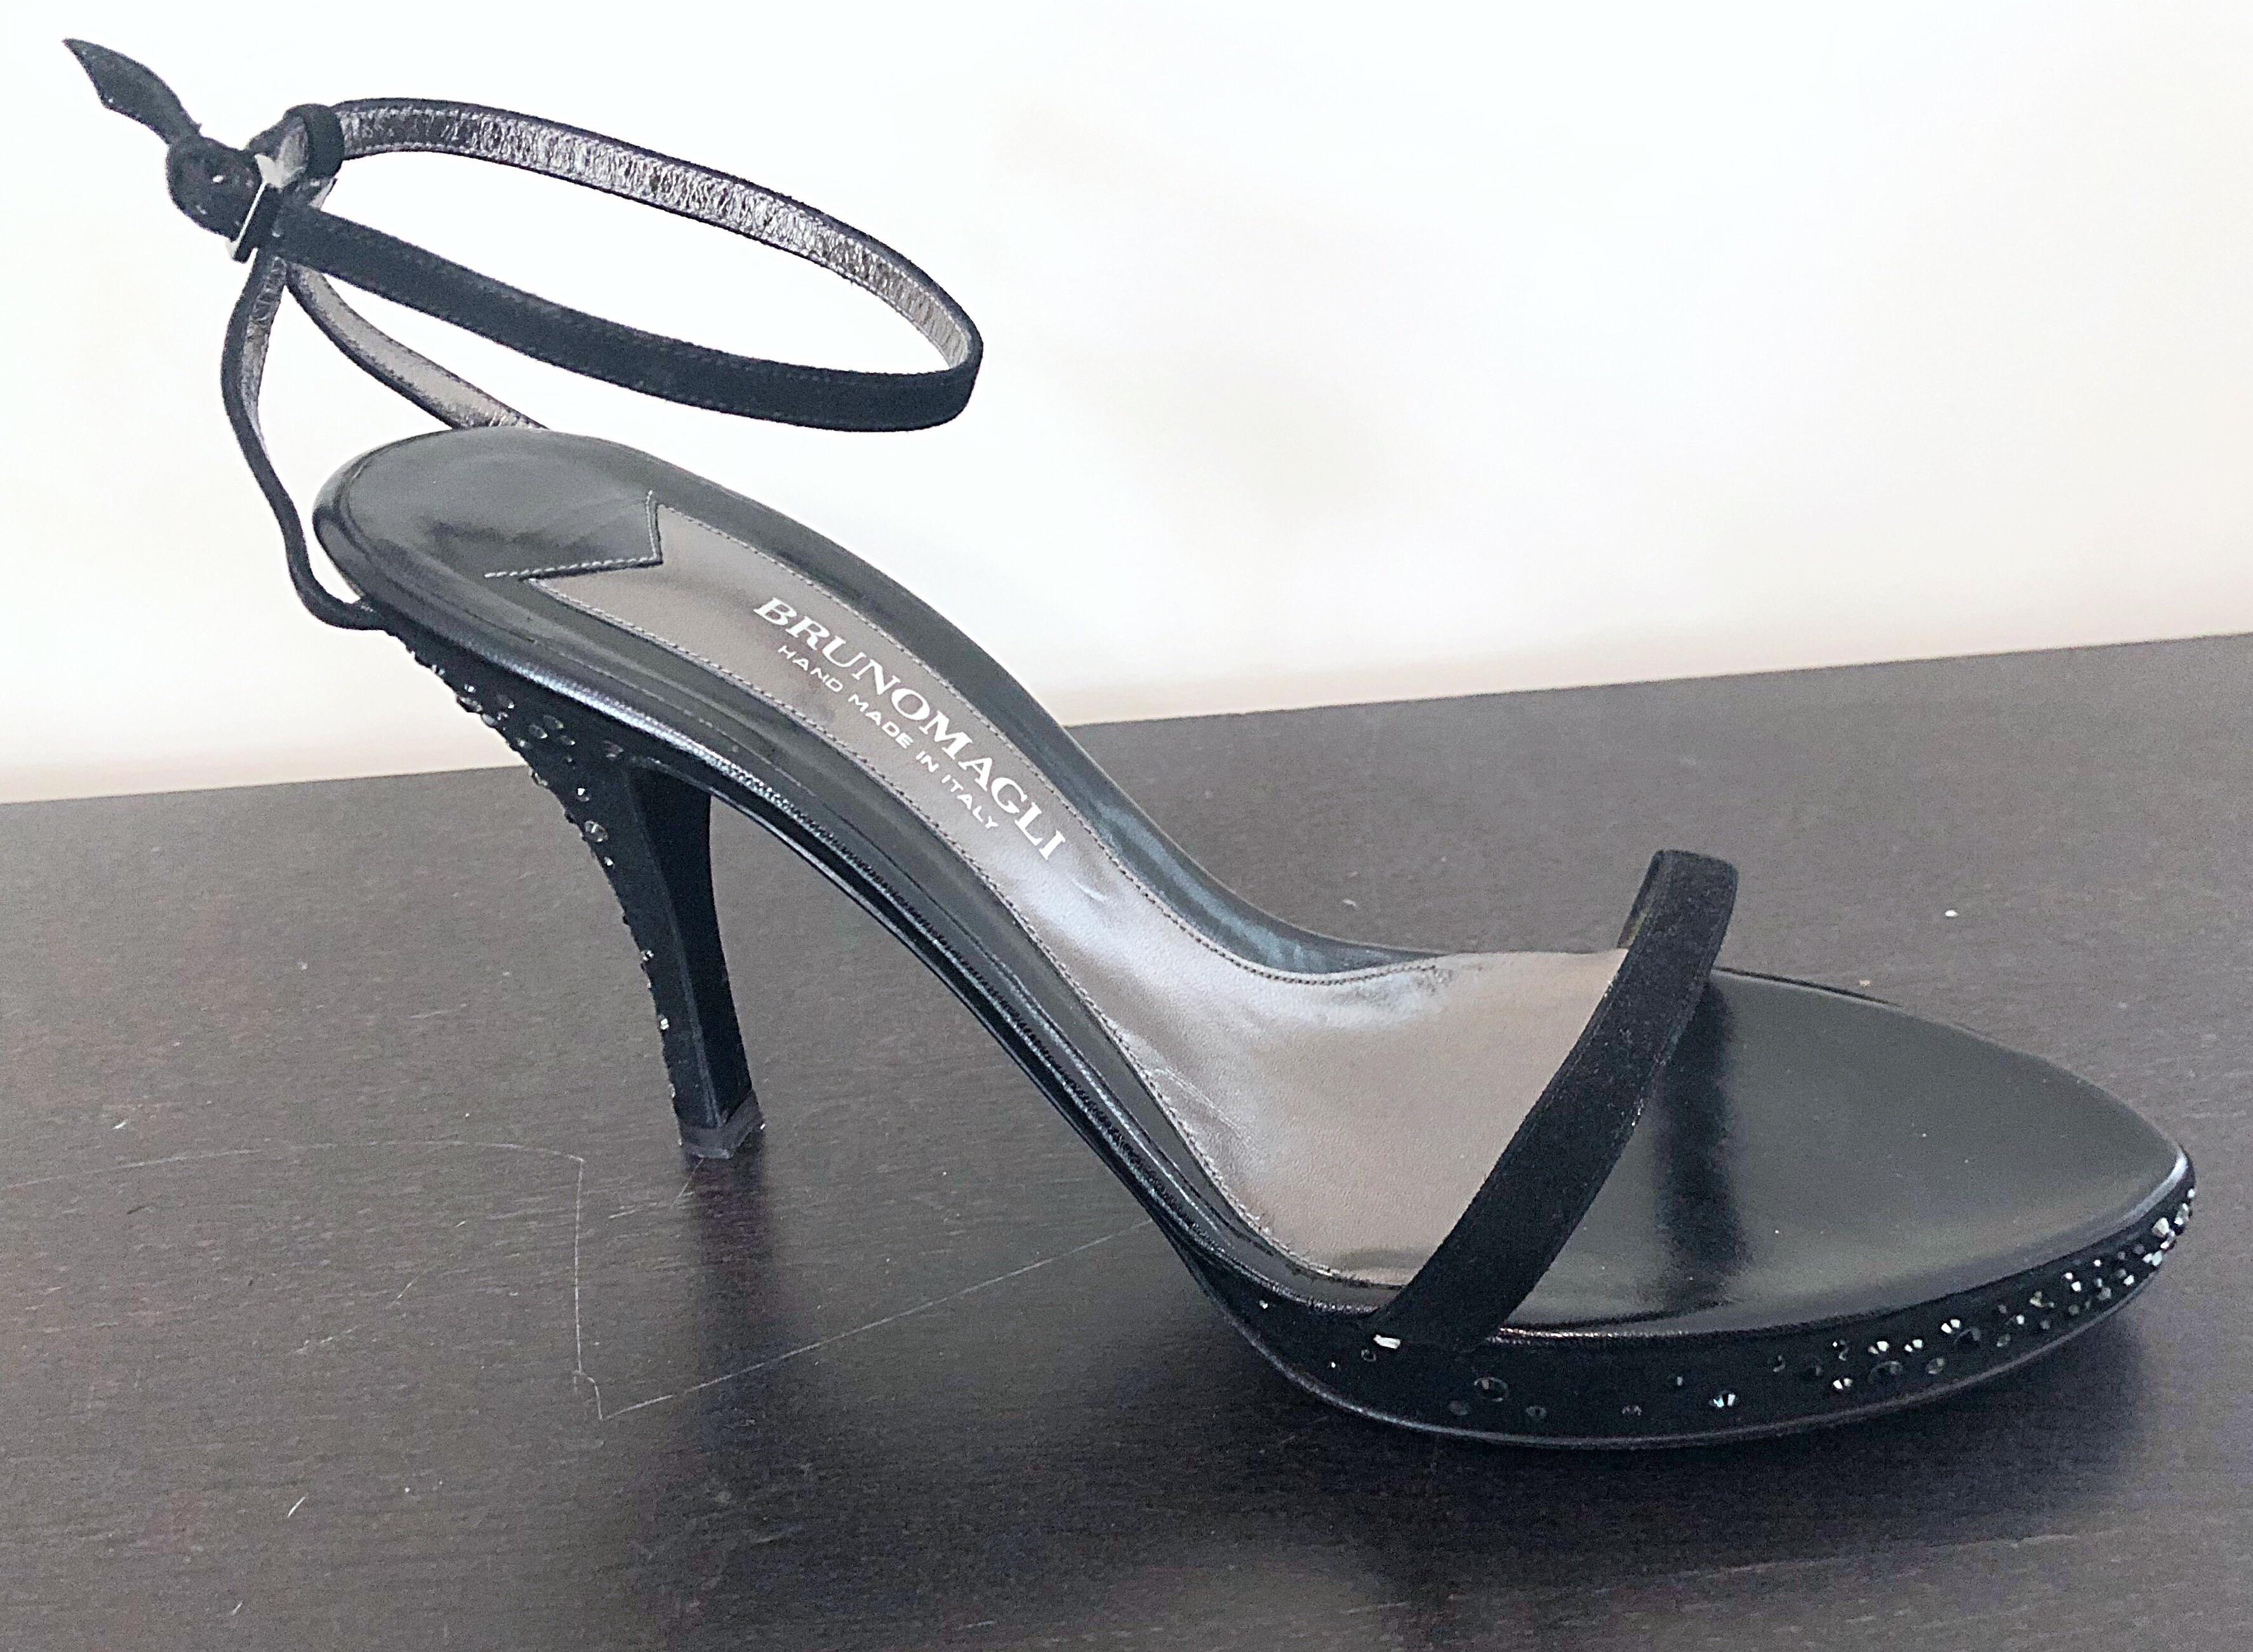 Rare vintage 90s never worn BRUNO MAGLI Size 42 / US 12 black silk rhinestone encrusted high heels! Super hard to find Size 42 (US 12) ! Features shiny silver and black rhinestones allover the high heel, and outter soles of the heel and sides.